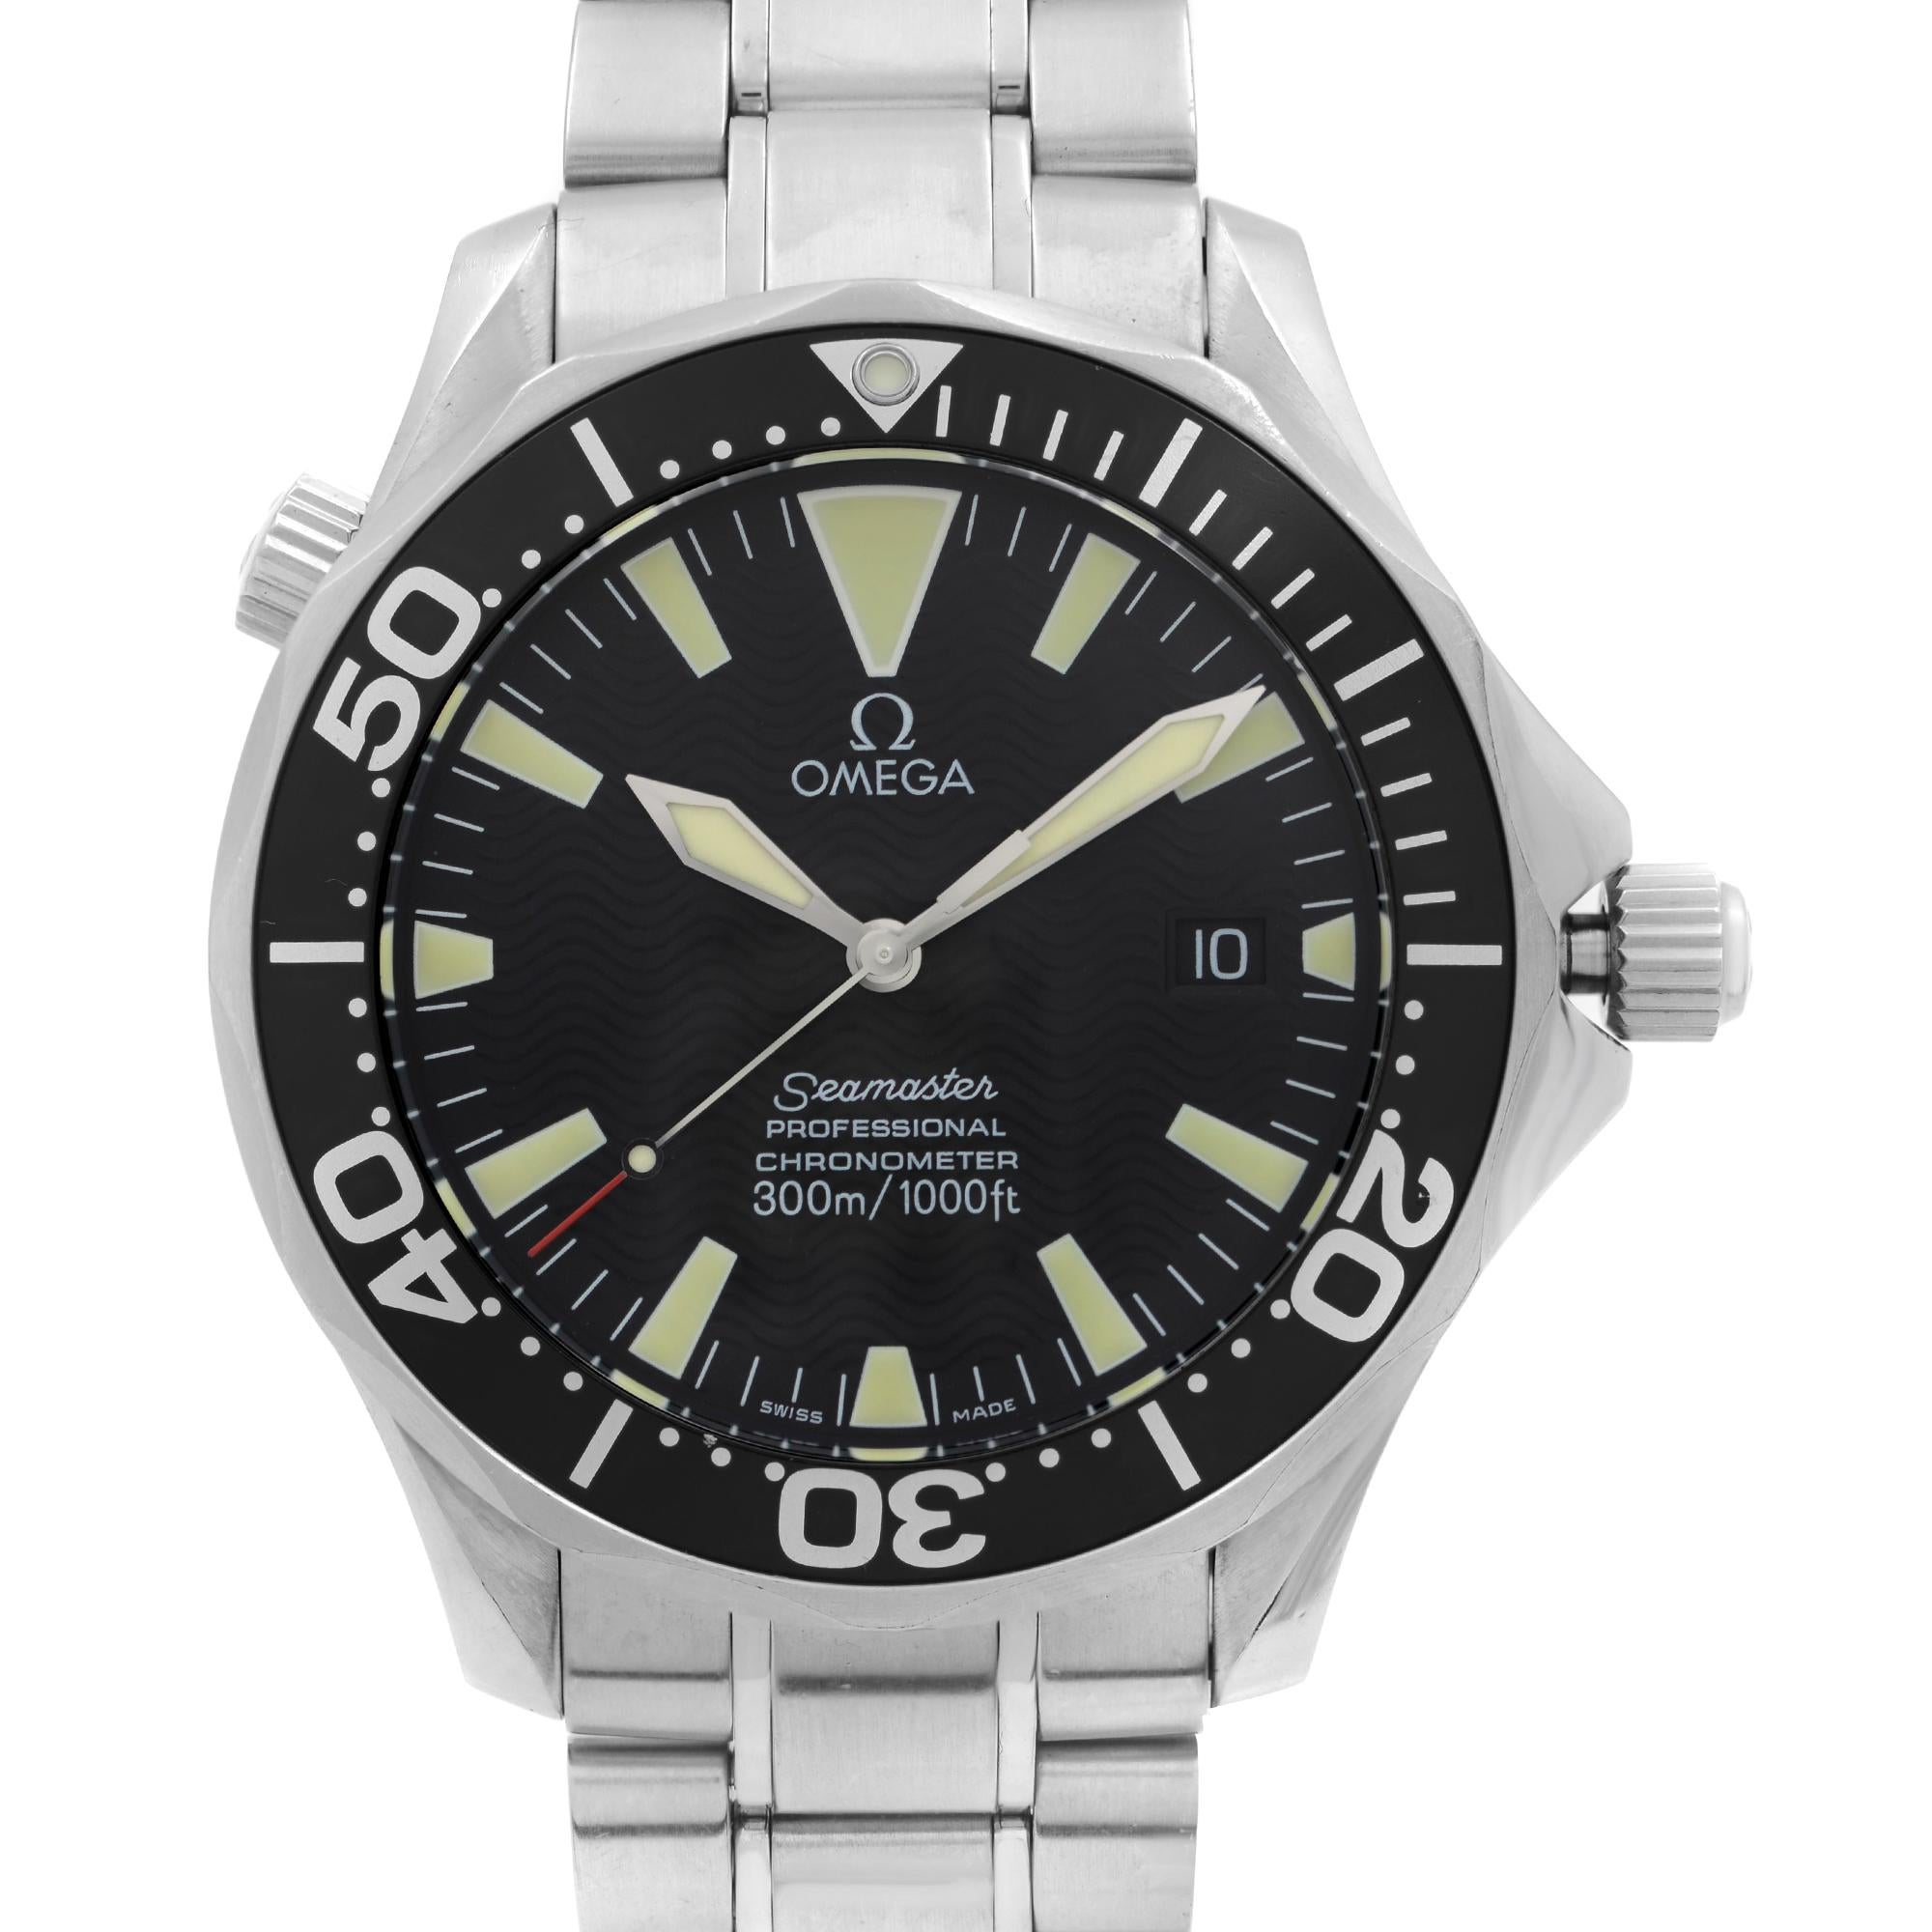 Pre-owned Omega Seamaster Stainless Steel Black Dial Automatic Men's Watch 2254.50.00. This Beautiful Timepiece is Powered by Mechanical (Automatic) Movement And Features: Round Stainless Steel Case with a Stainless Steel Bracelet, Double Pushbutton